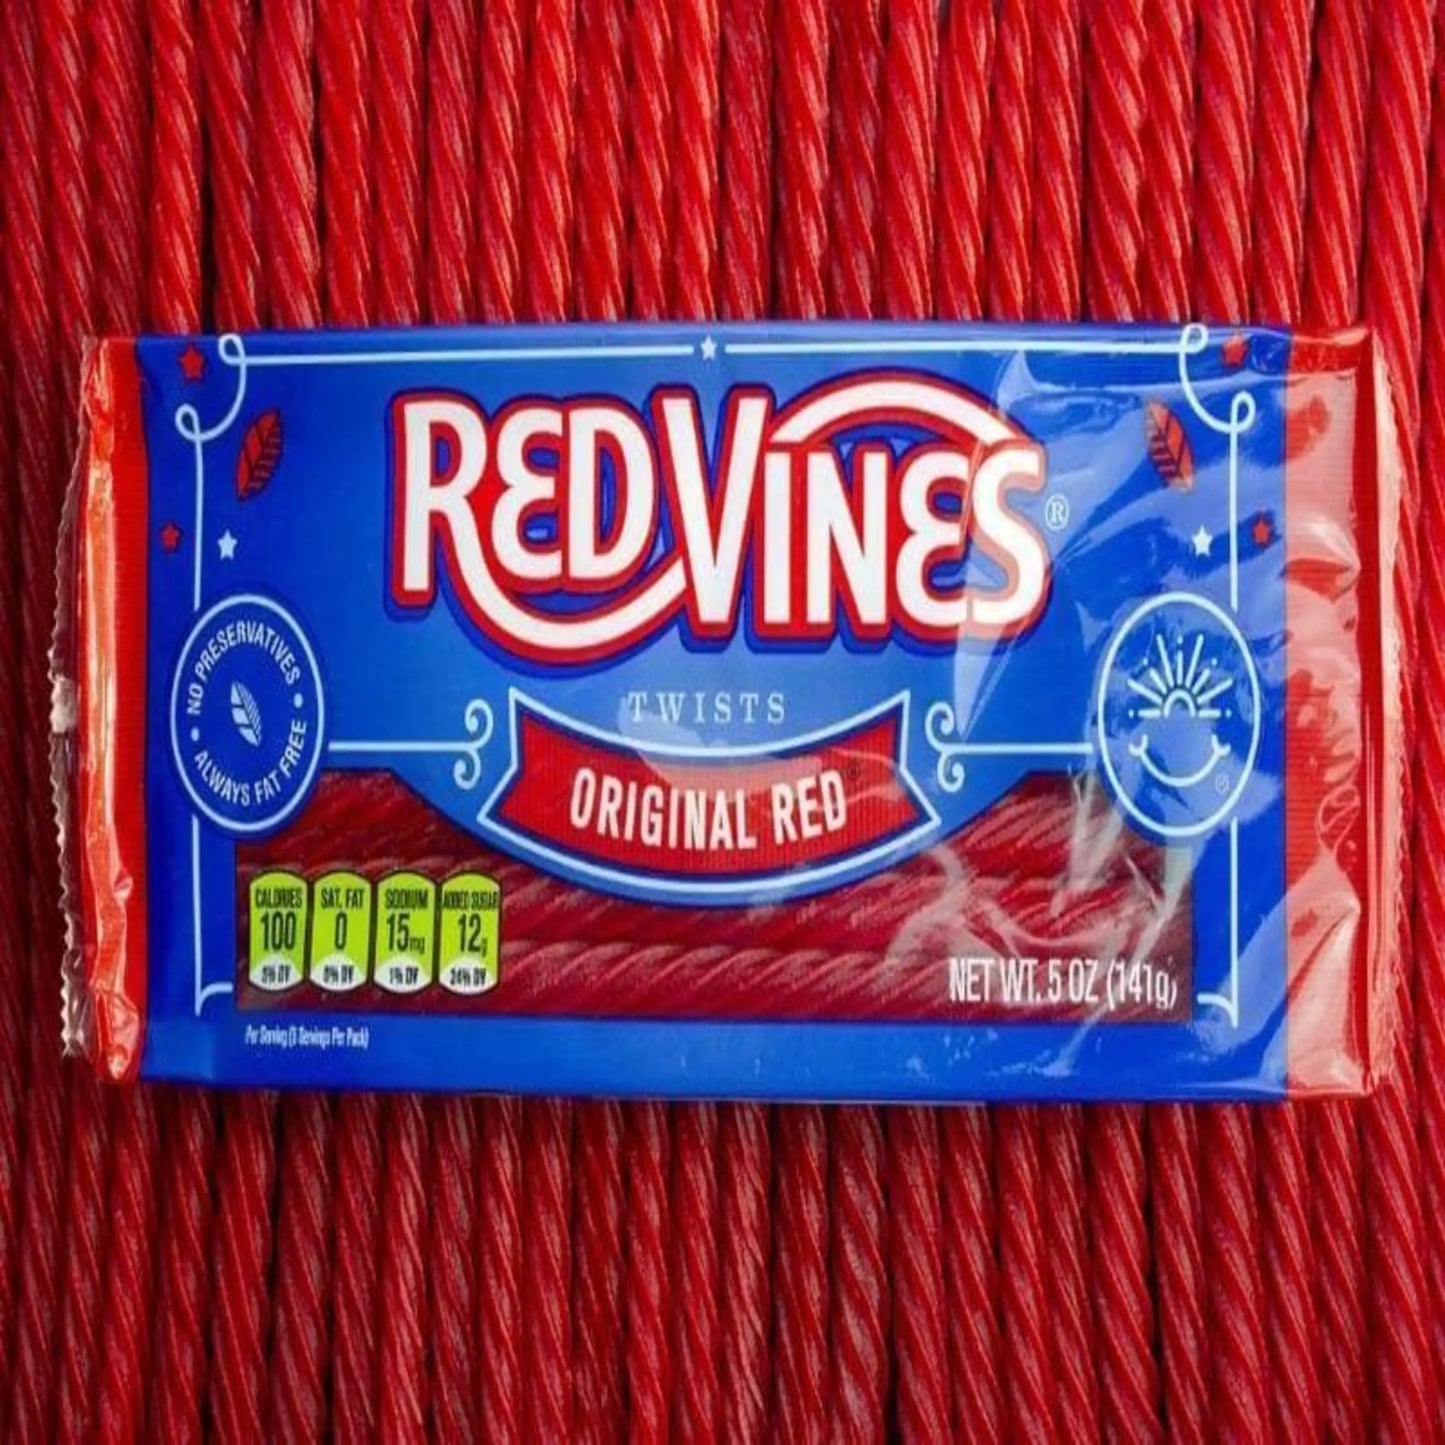 Red Vines Original Red Tray on red candy twists